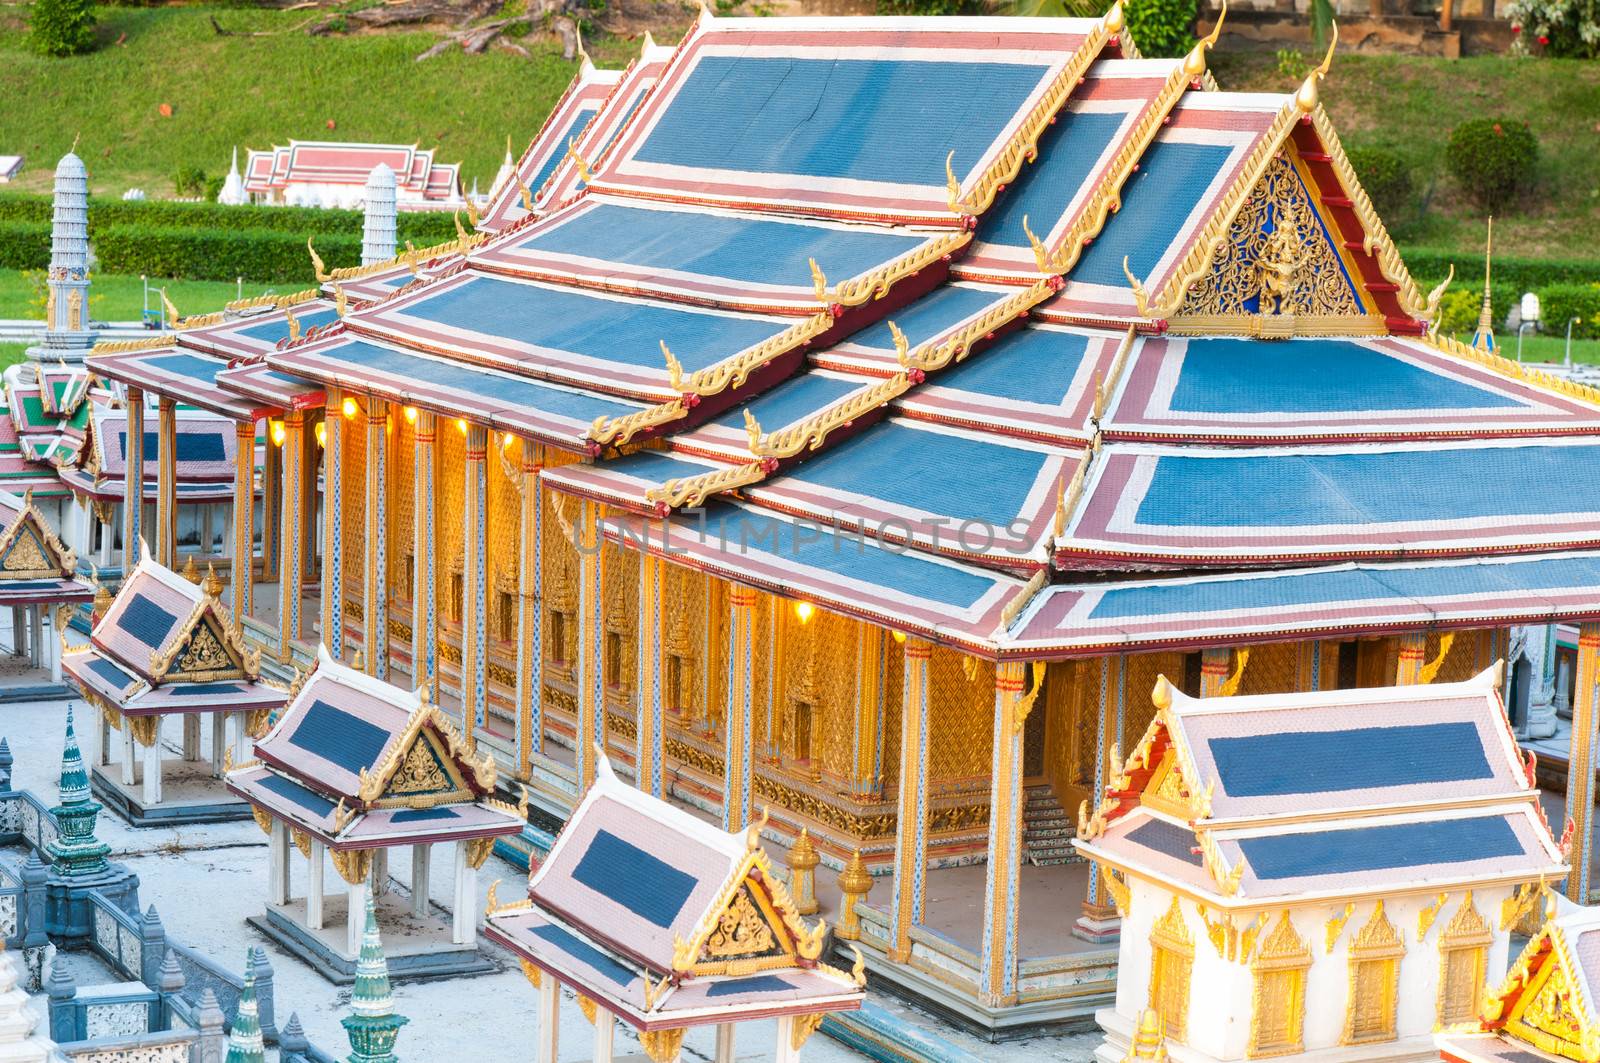 The royal temple of the emerald budoha is reproduced to mini size in mini siam, Thailand.